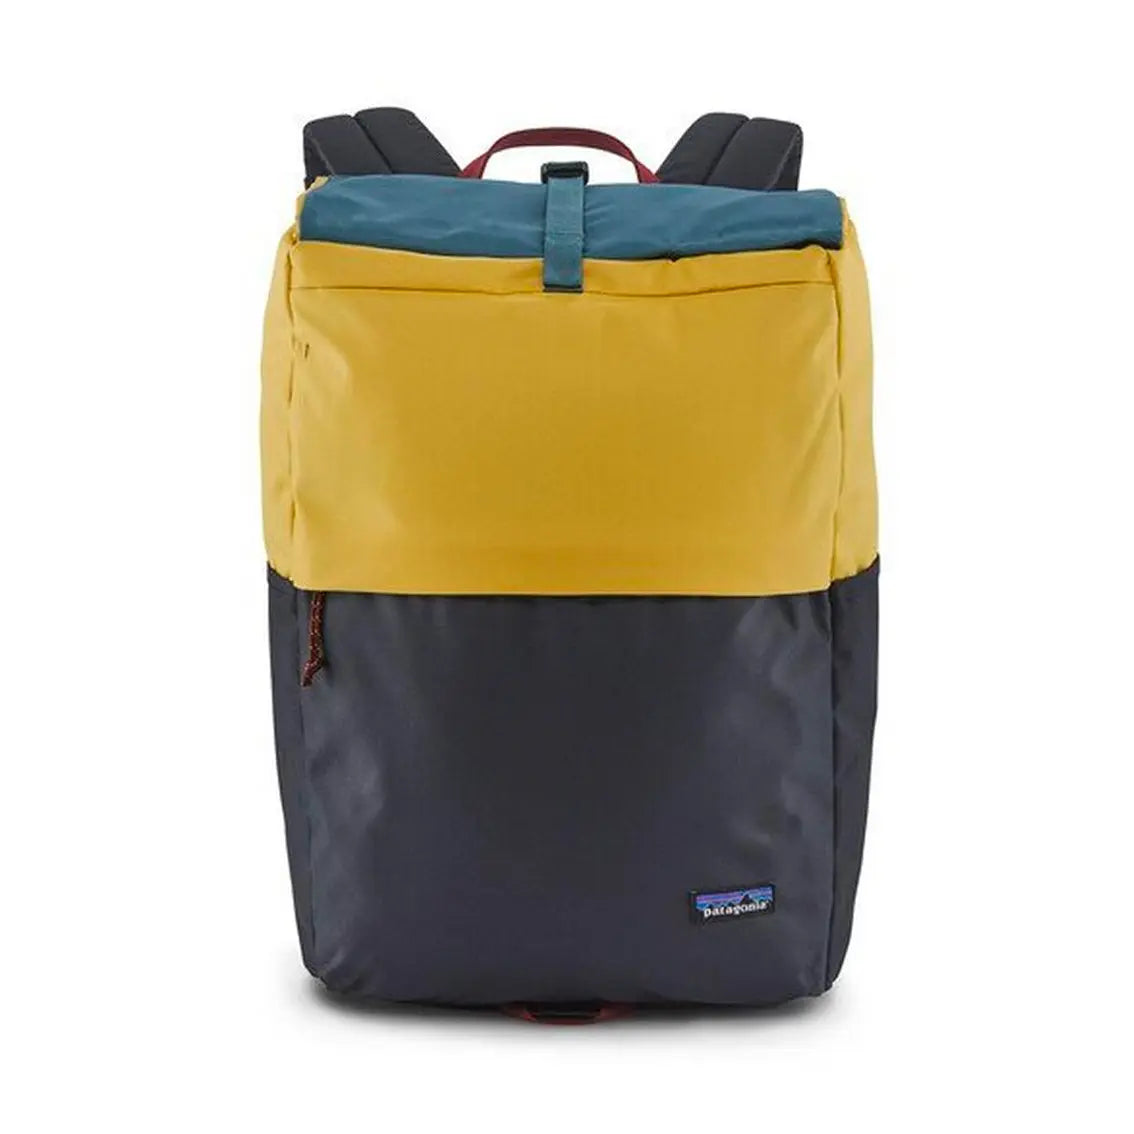 Patagonia Arbor Roll Top Pack - Patchwork / Pitch Blue